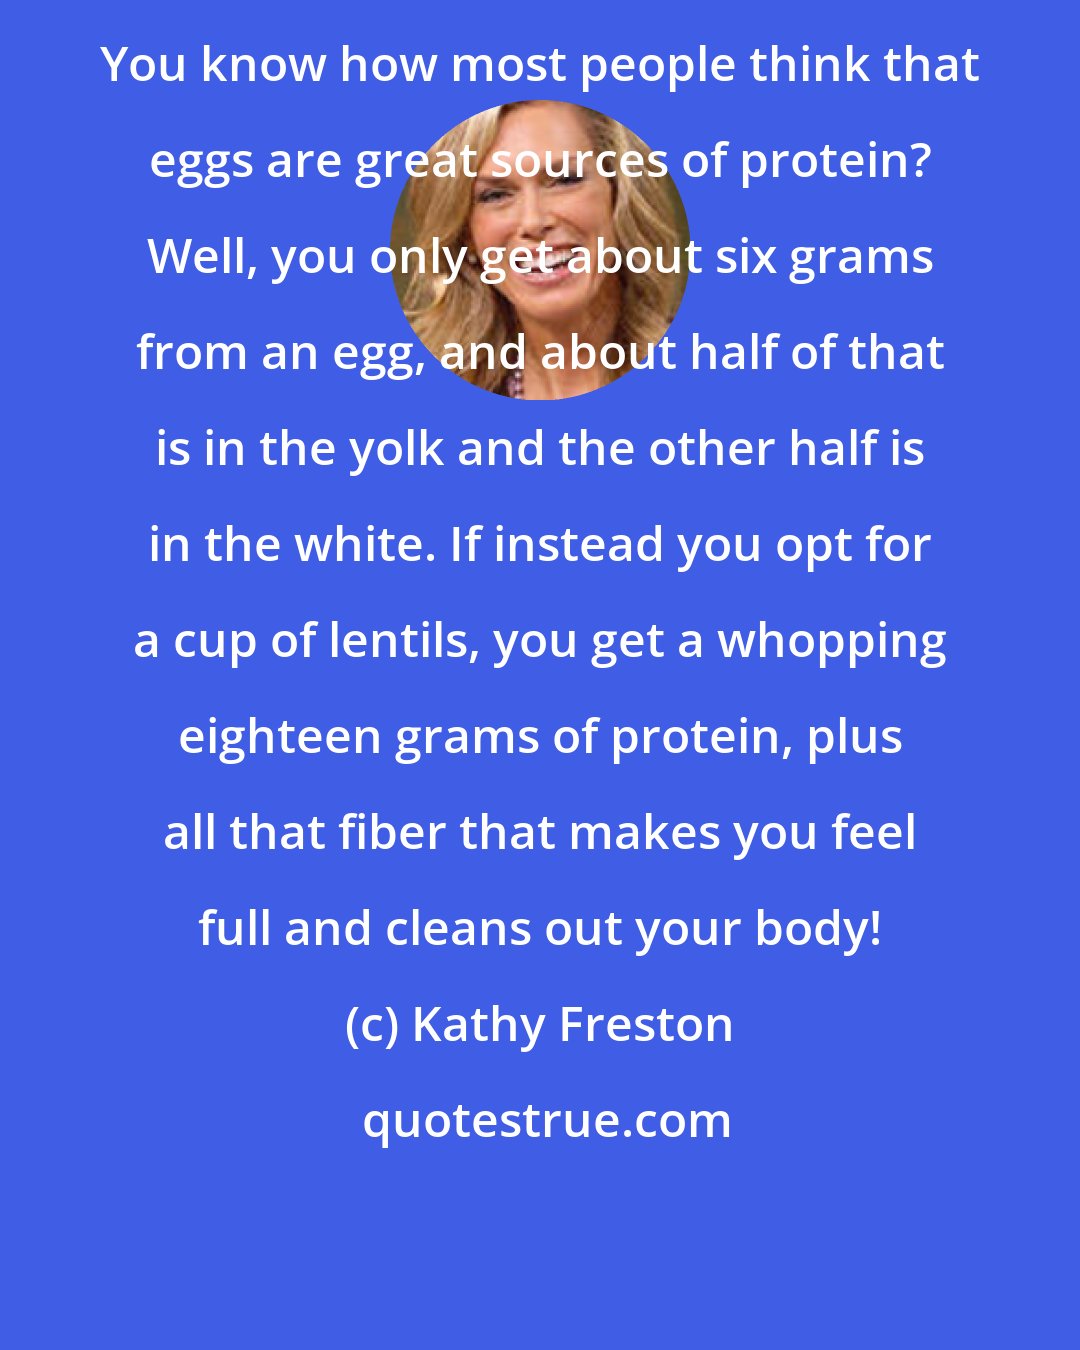 Kathy Freston: You know how most people think that eggs are great sources of protein? Well, you only get about six grams from an egg, and about half of that is in the yolk and the other half is in the white. If instead you opt for a cup of lentils, you get a whopping eighteen grams of protein, plus all that fiber that makes you feel full and cleans out your body!